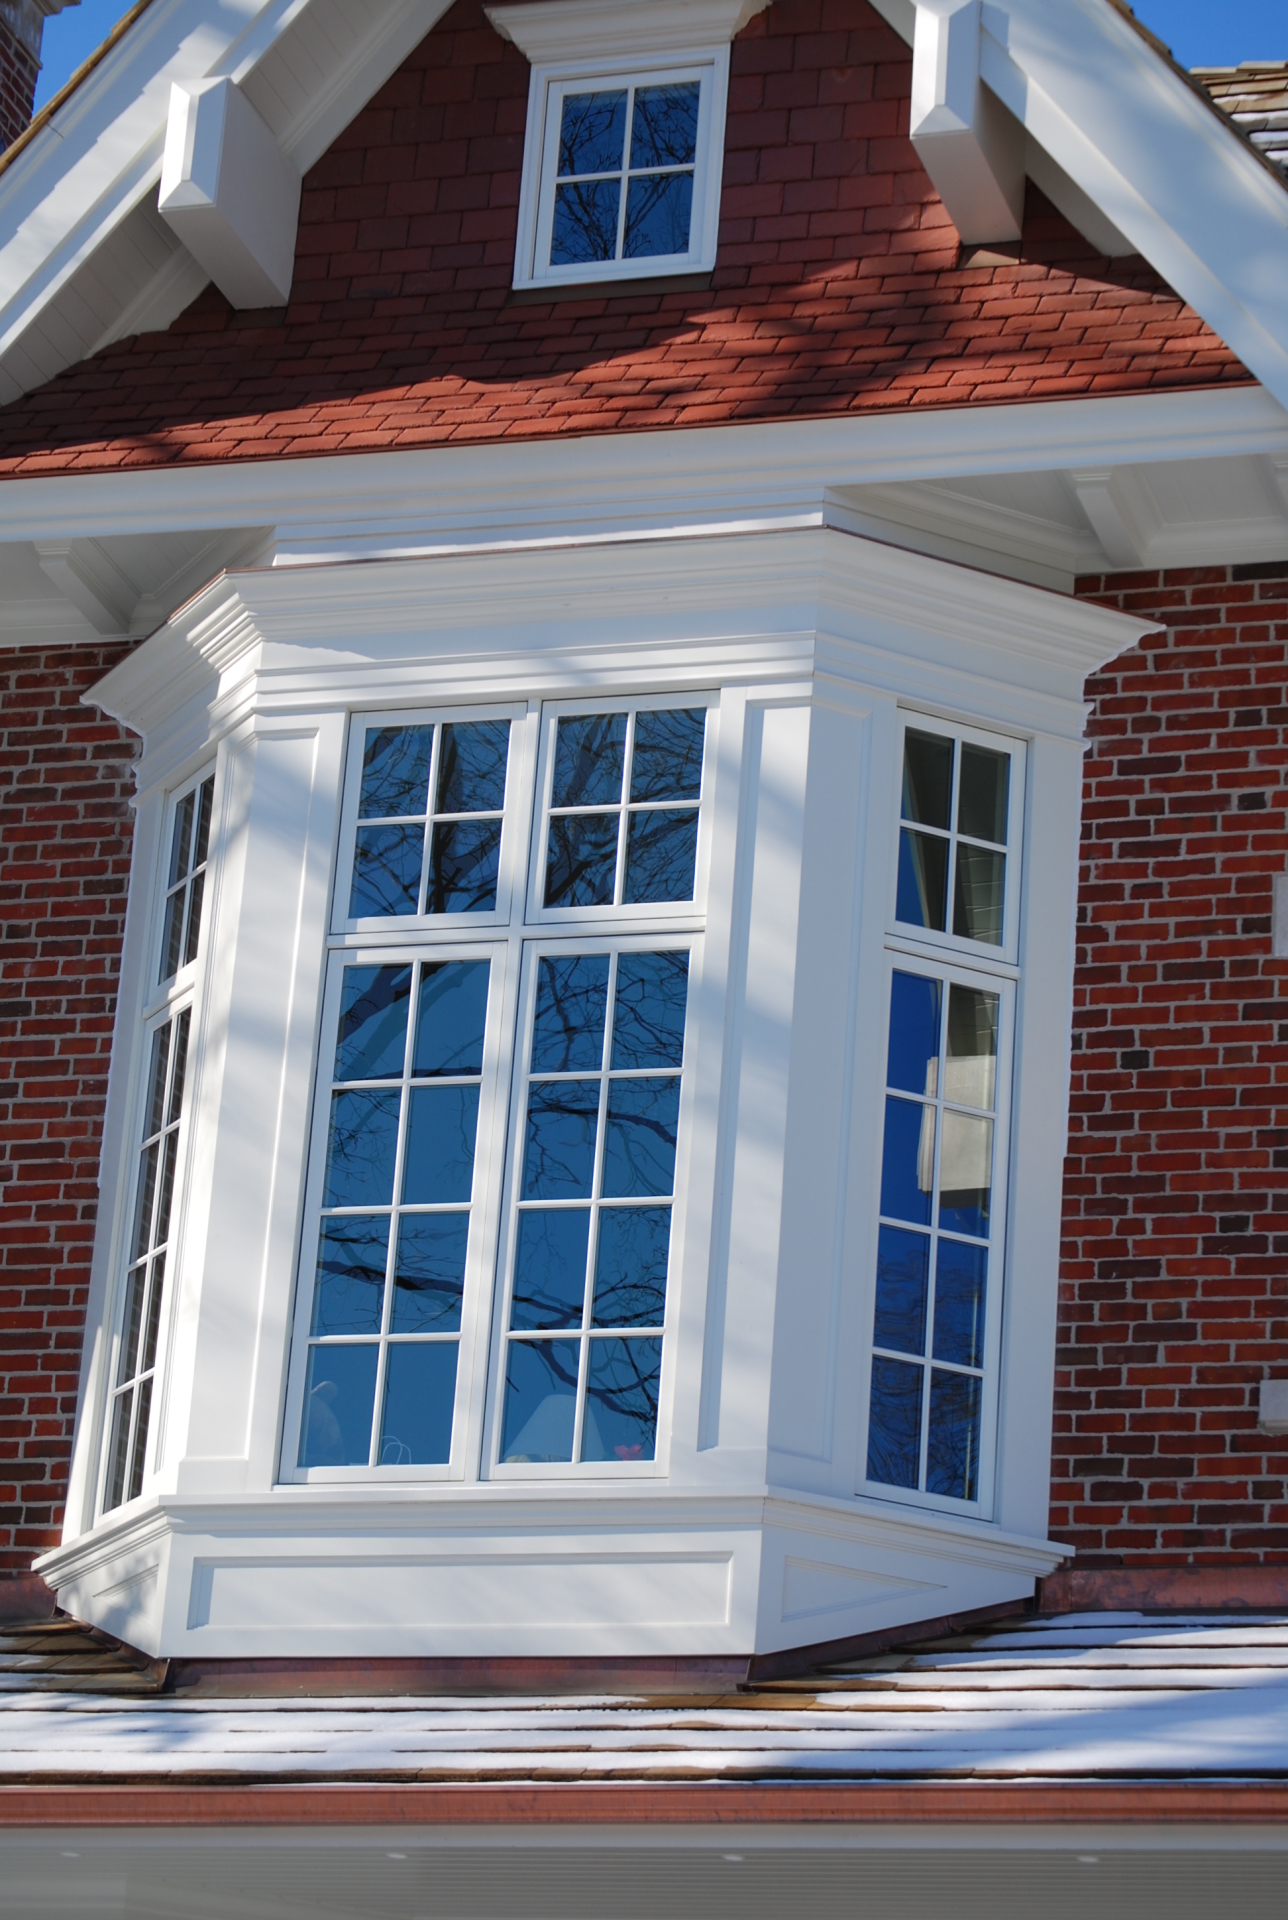 boxed out windows, bay window, dormers, window cladding, exterior trim, exterior carpentry, exterior wood work, toronto homes, window trim, roof dormers, cornice moulding